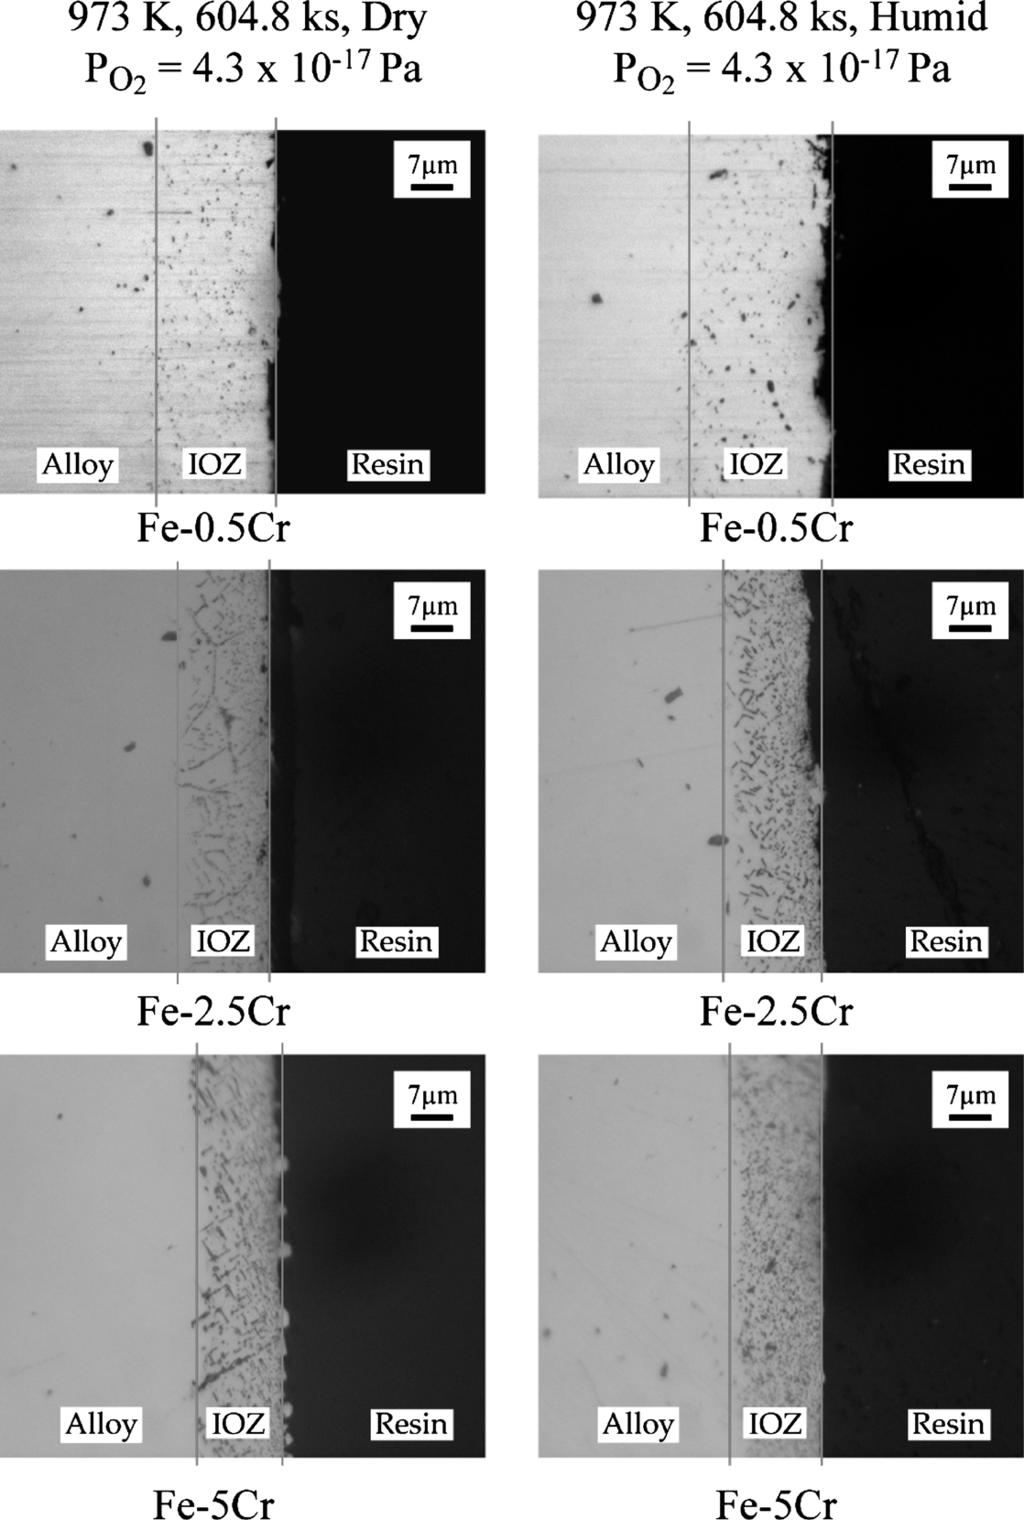 ISIJ International, Vol. 50 (2010), No. 2 Fig. 4a. Cross sections of Fe Cr alloys after internal oxidation at 973 K in dry and humid atmospheres for 604.8 ks. Fig. 5. Square of thickness of the IOZ in Fe Cr alloys as a function of oxidation time.